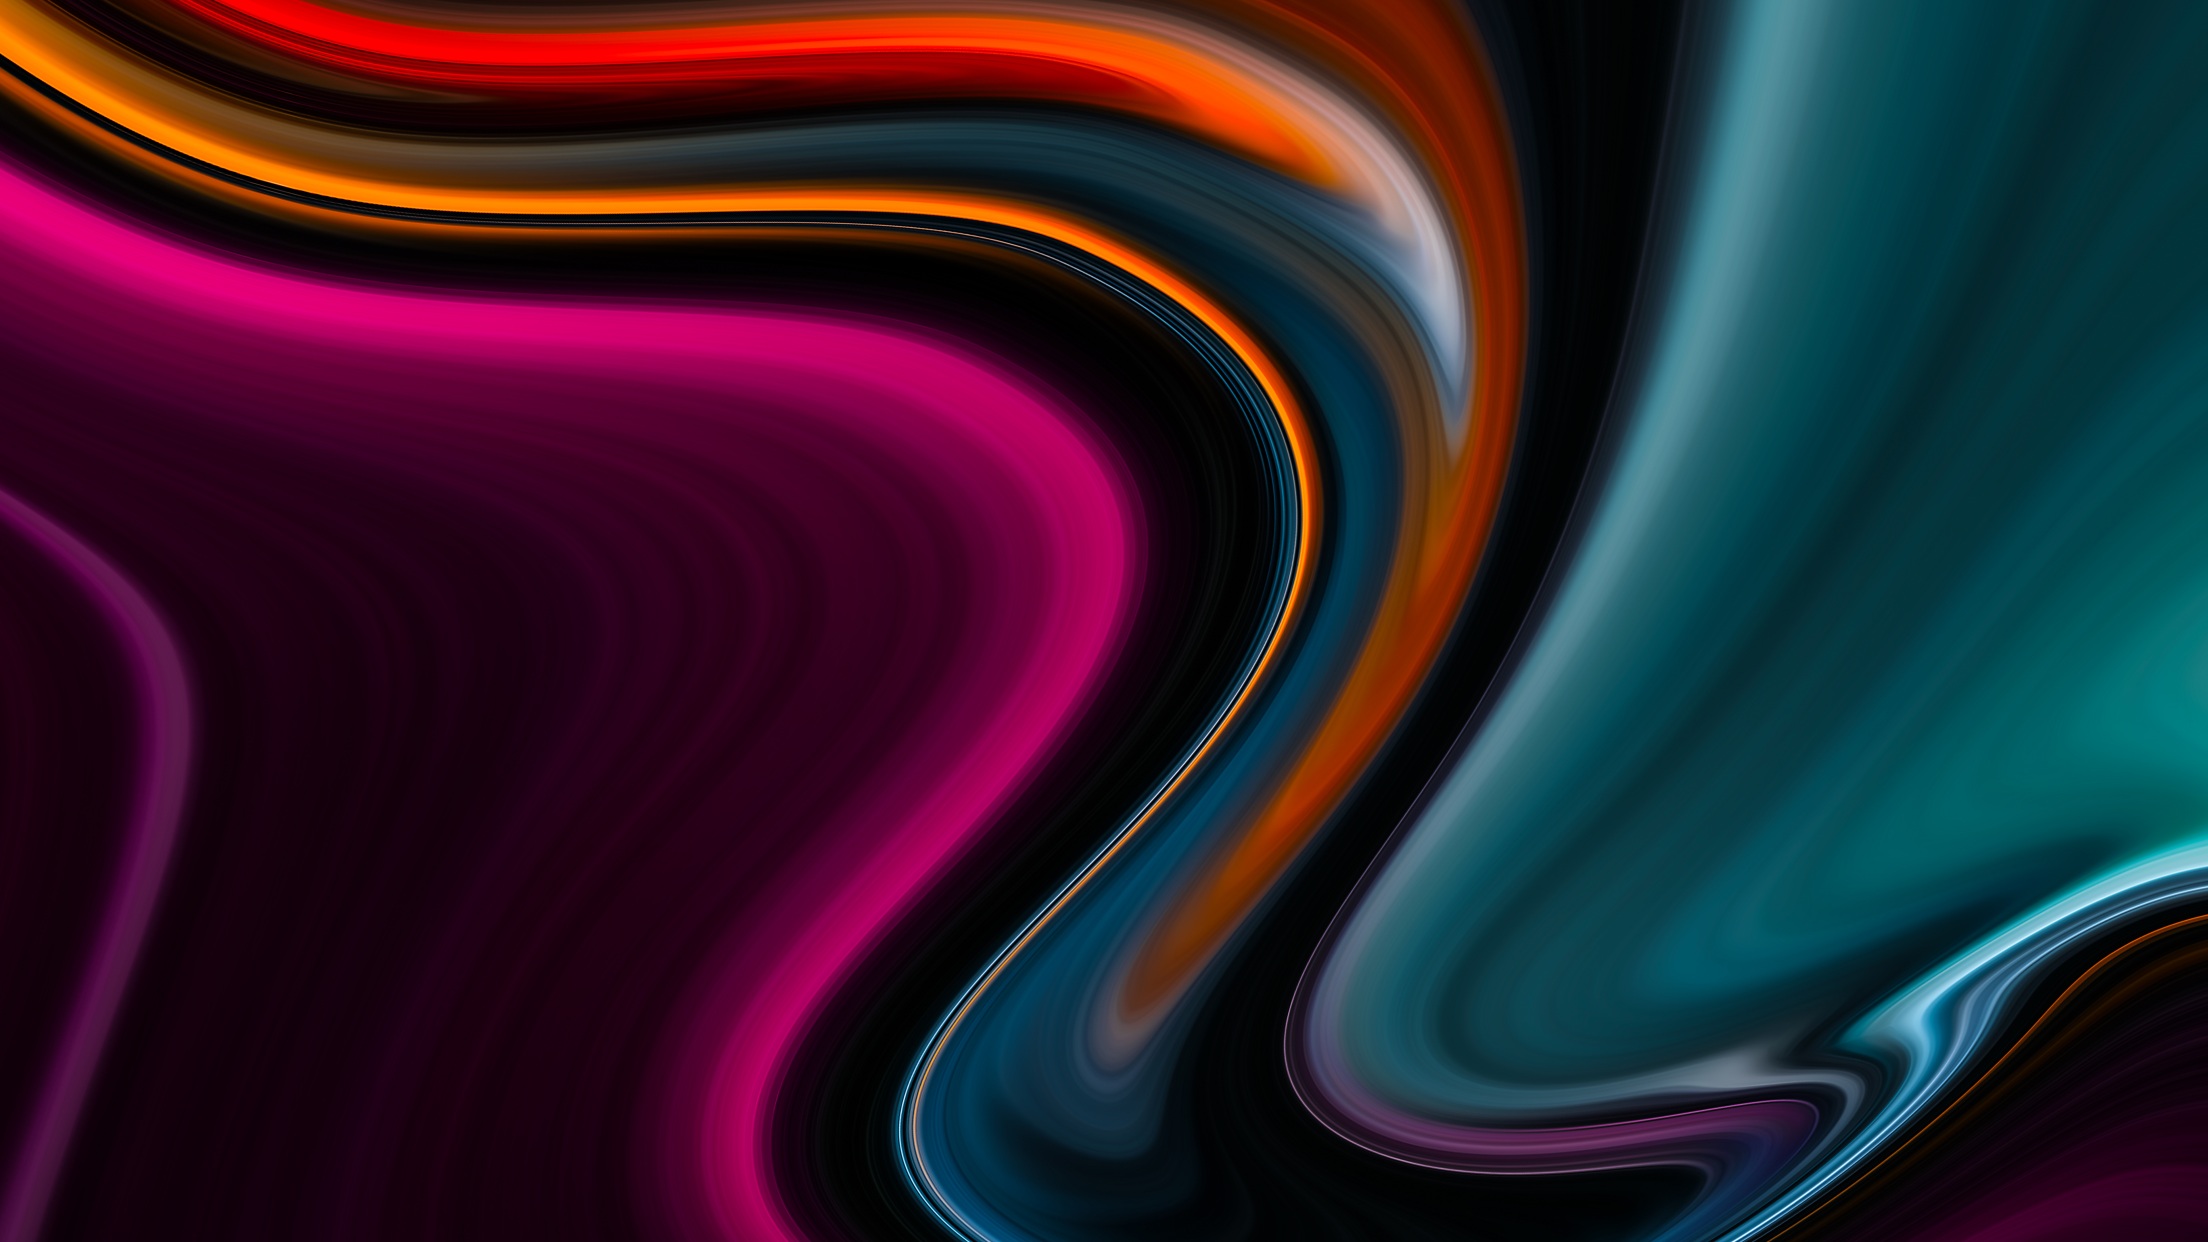 Abstract Color Flow 4k - 4k Wallpapers - 40.000+ ipad wallpapers 4k ...